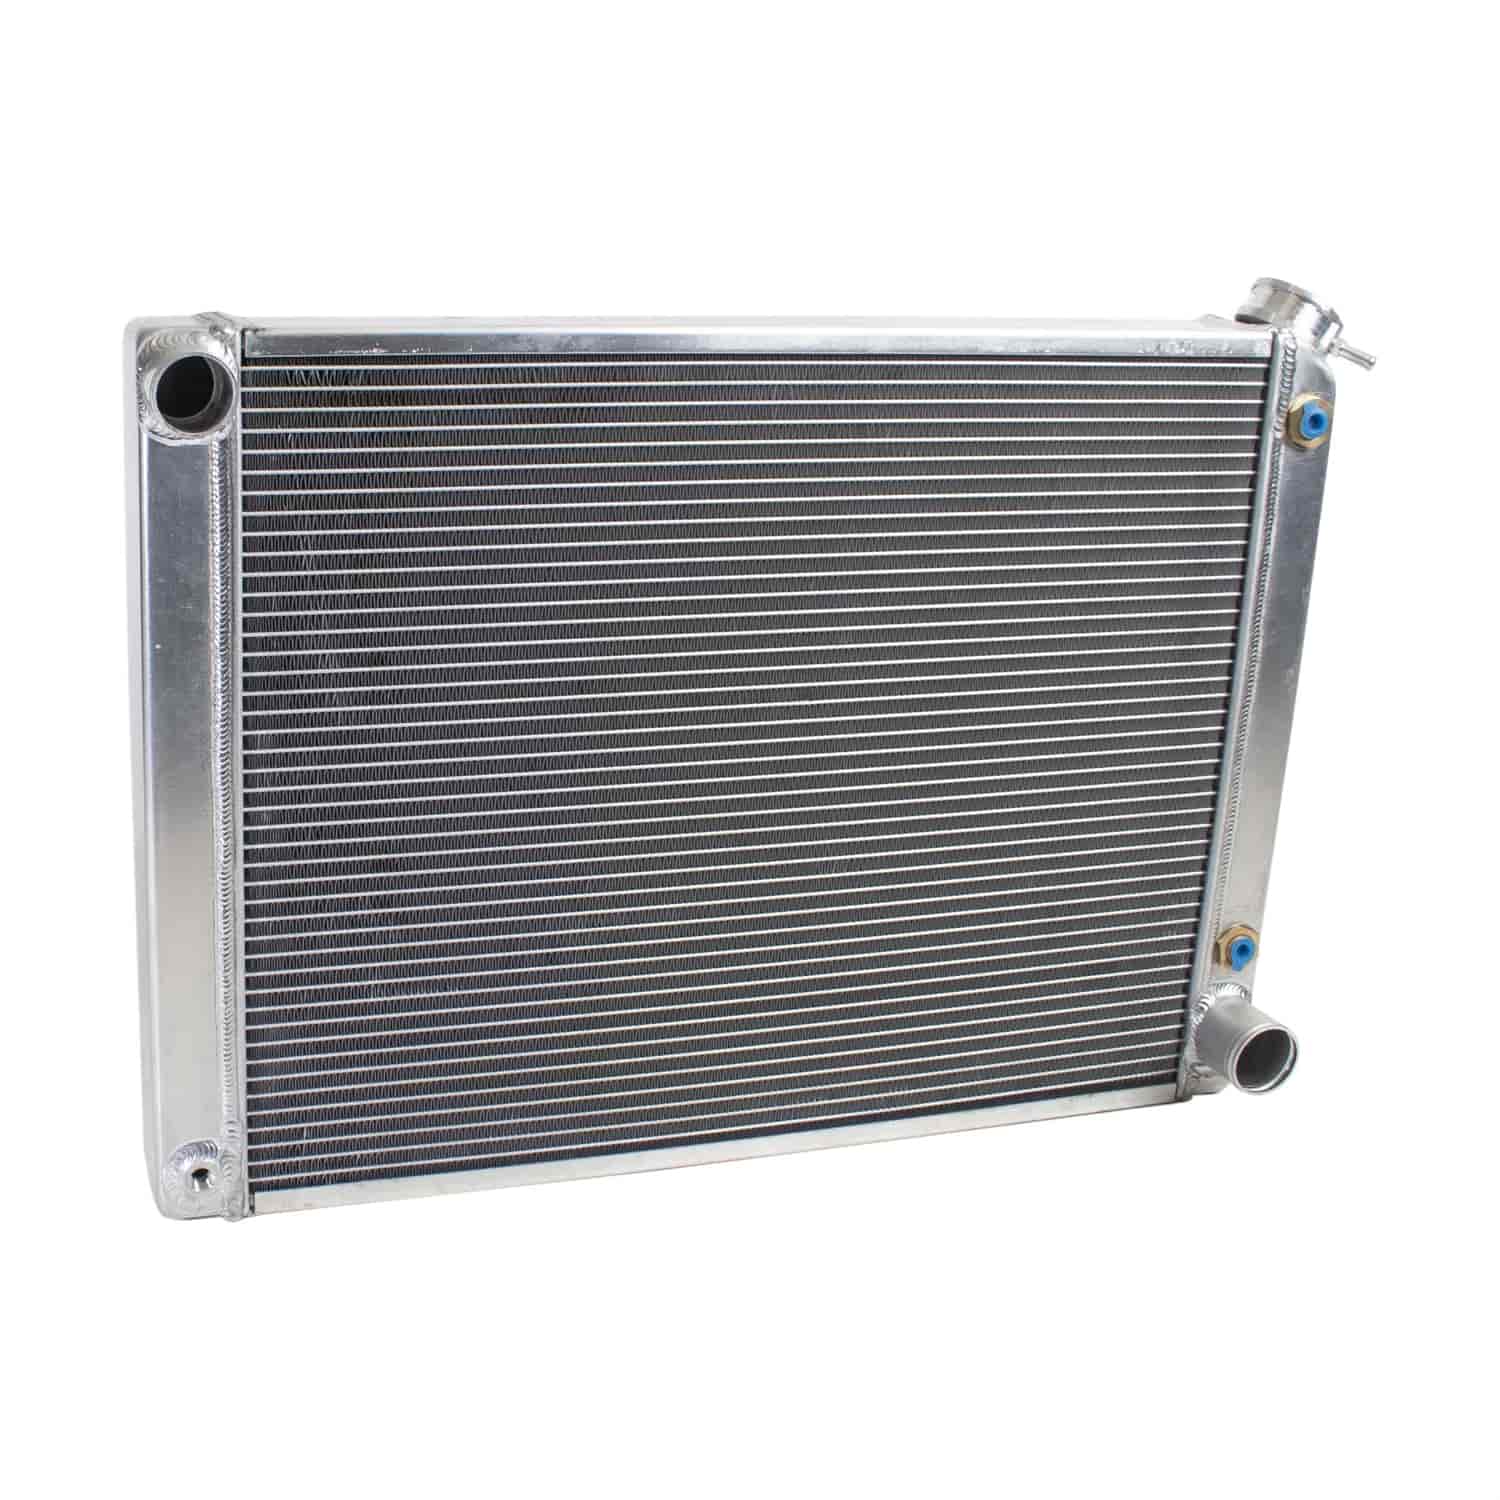 PerformanceFit Radiator for GM 1968-1979 X Body with Transmission Cooler